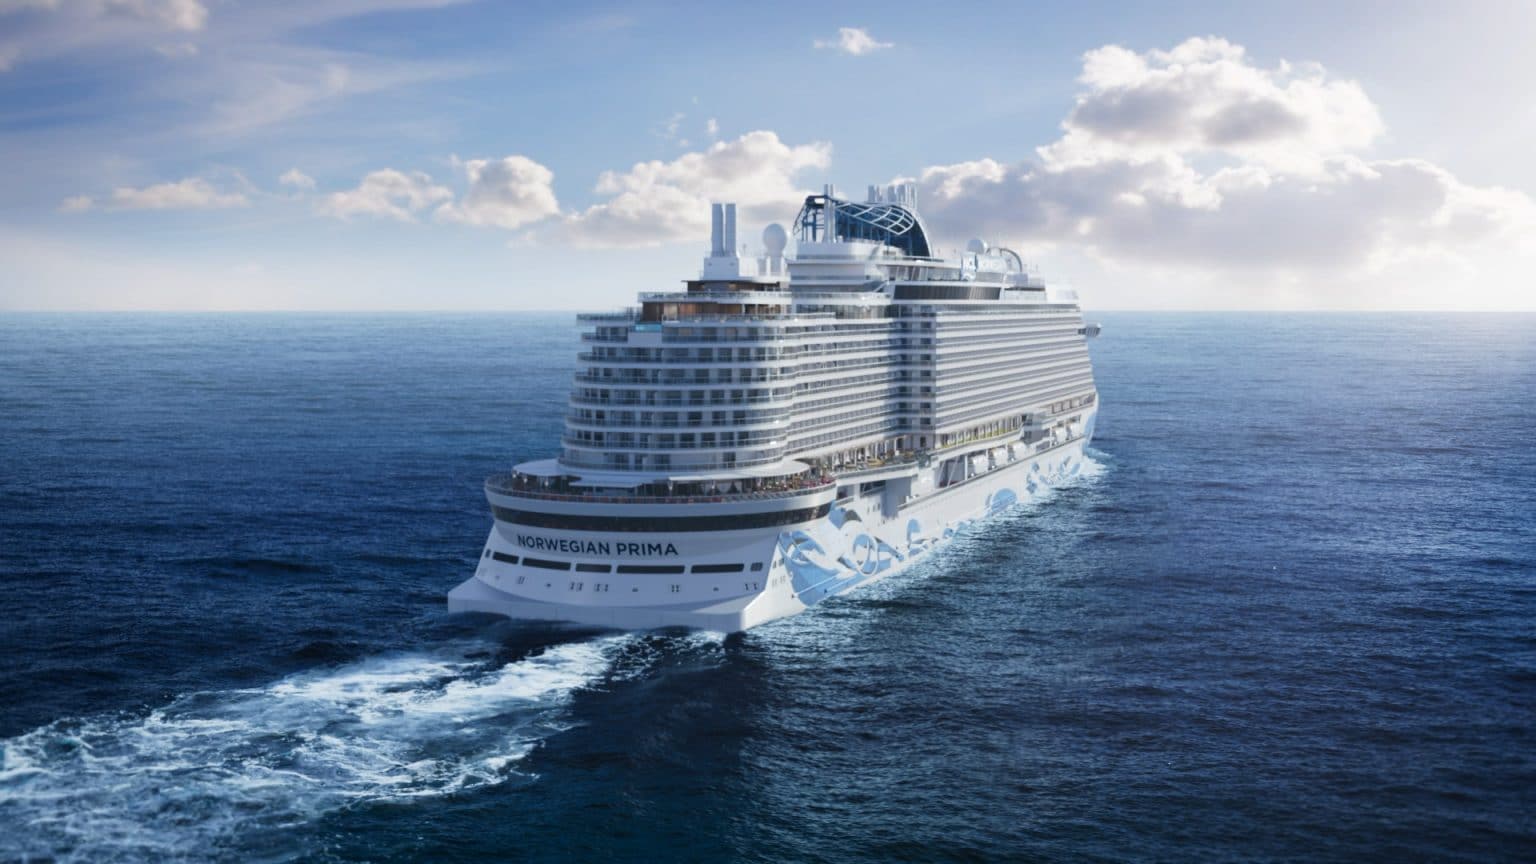 First Look at Norwegian Prima, NCL's Newest Ship Debuting in 2022